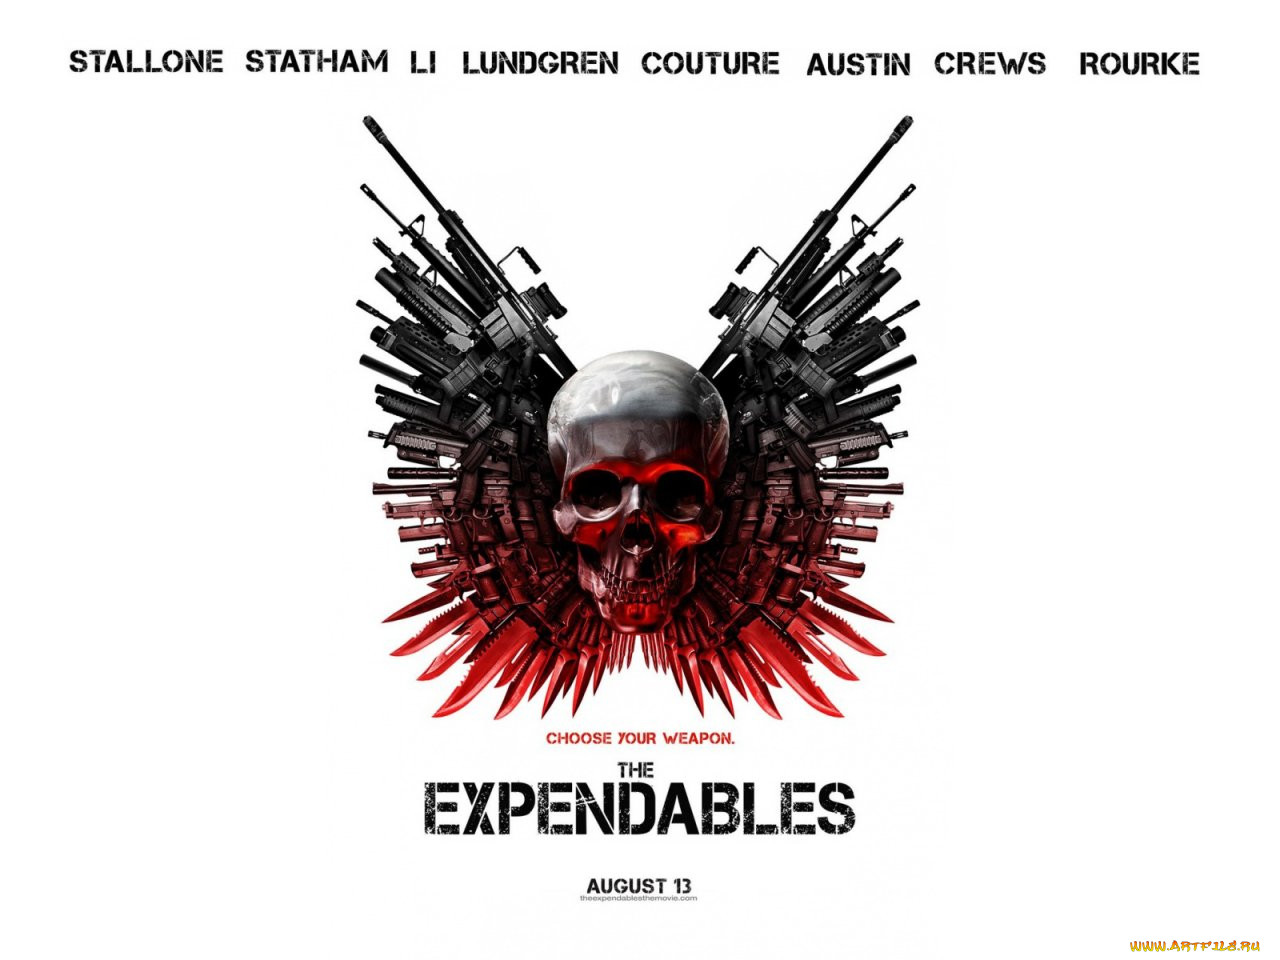 expendables, , , the